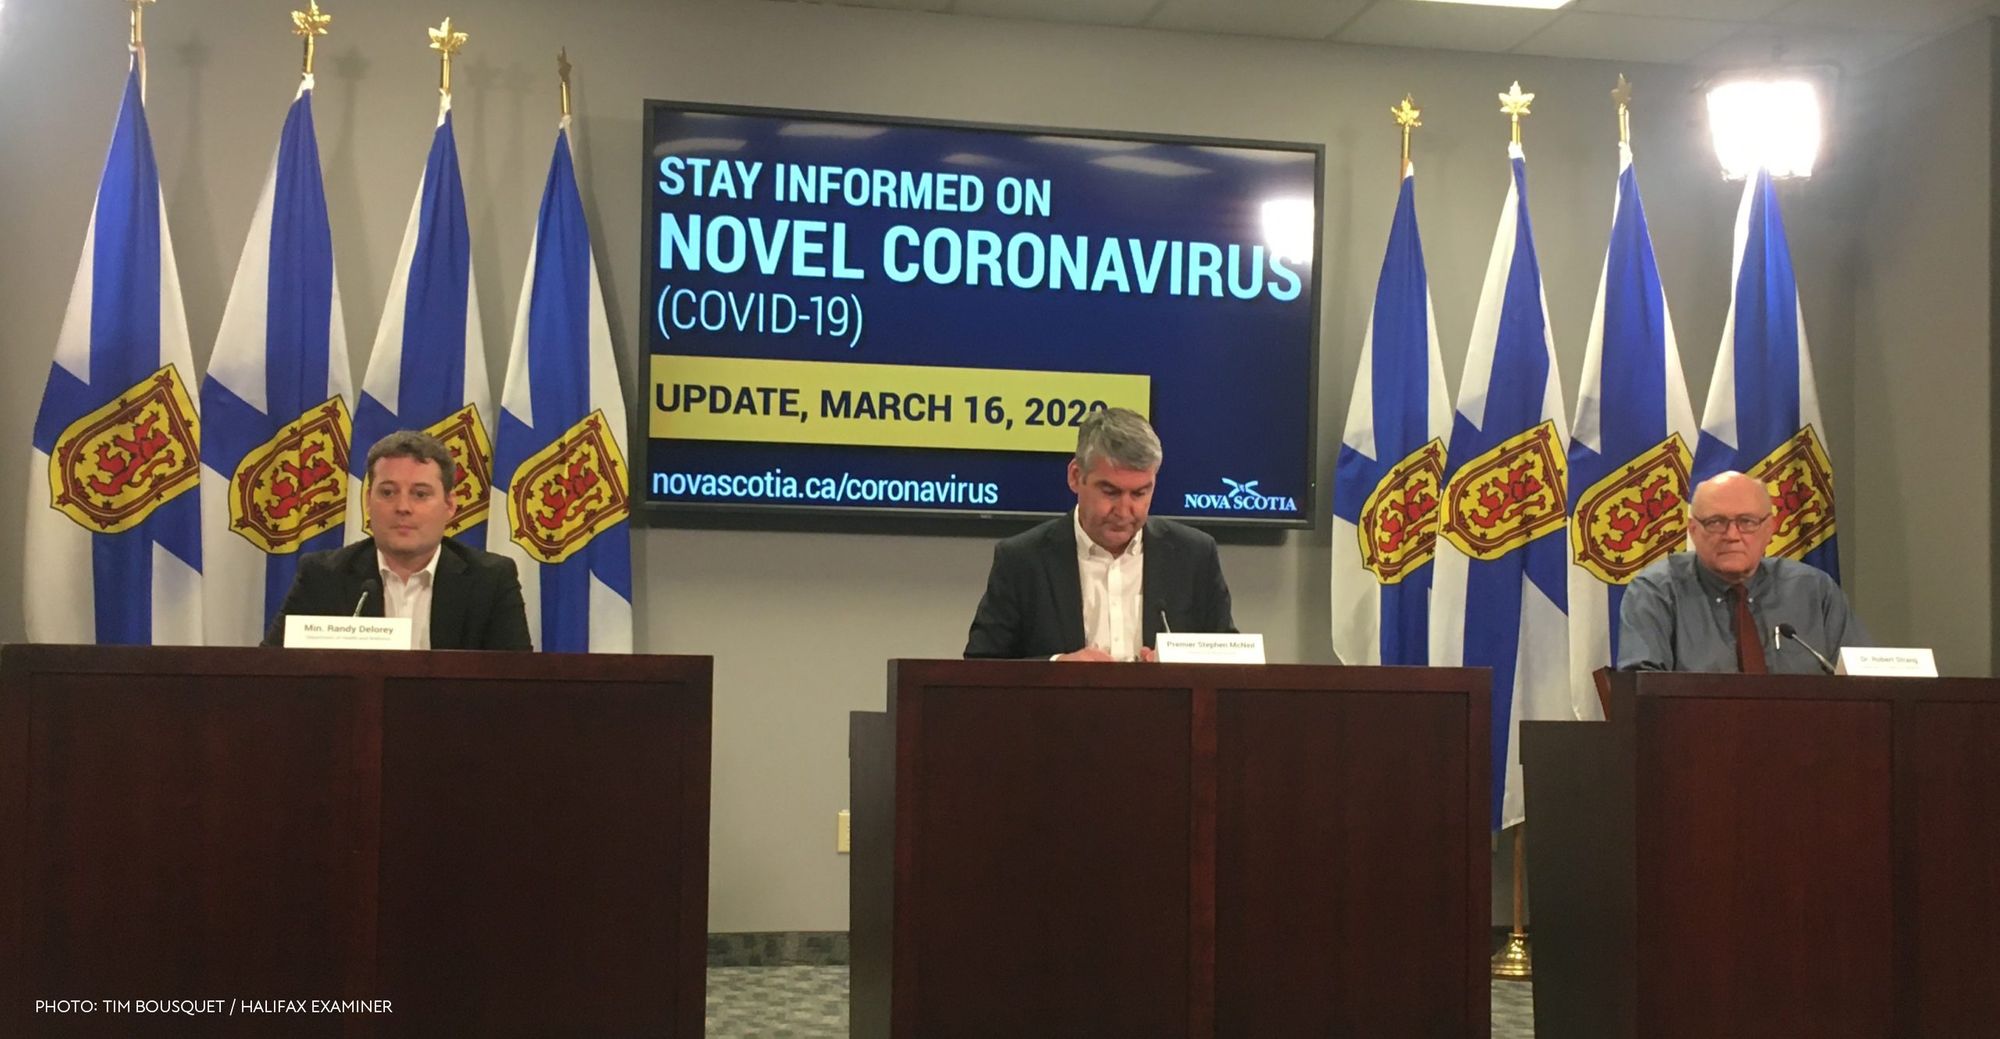 Premier Steven McNeil addressing Nova Scotian viewers during Covid-19 press conference on March 16, 2020.